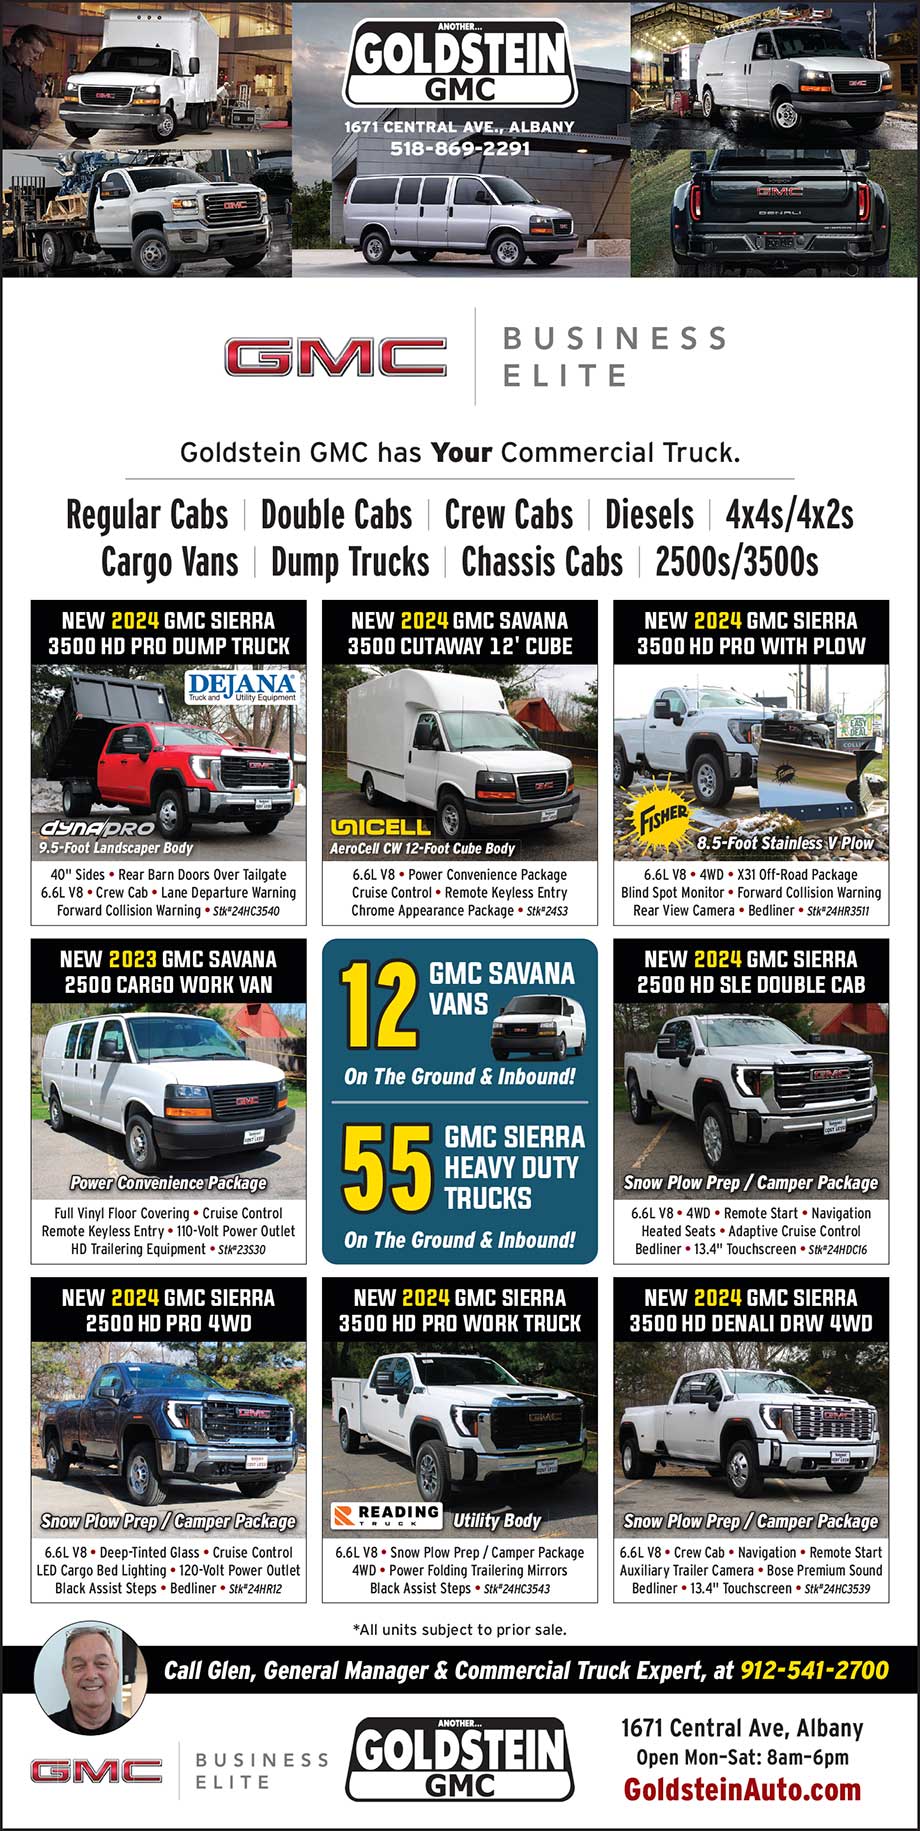 Goldstein Buick GMC of Albany, NY Business Elite Newspaper Specials